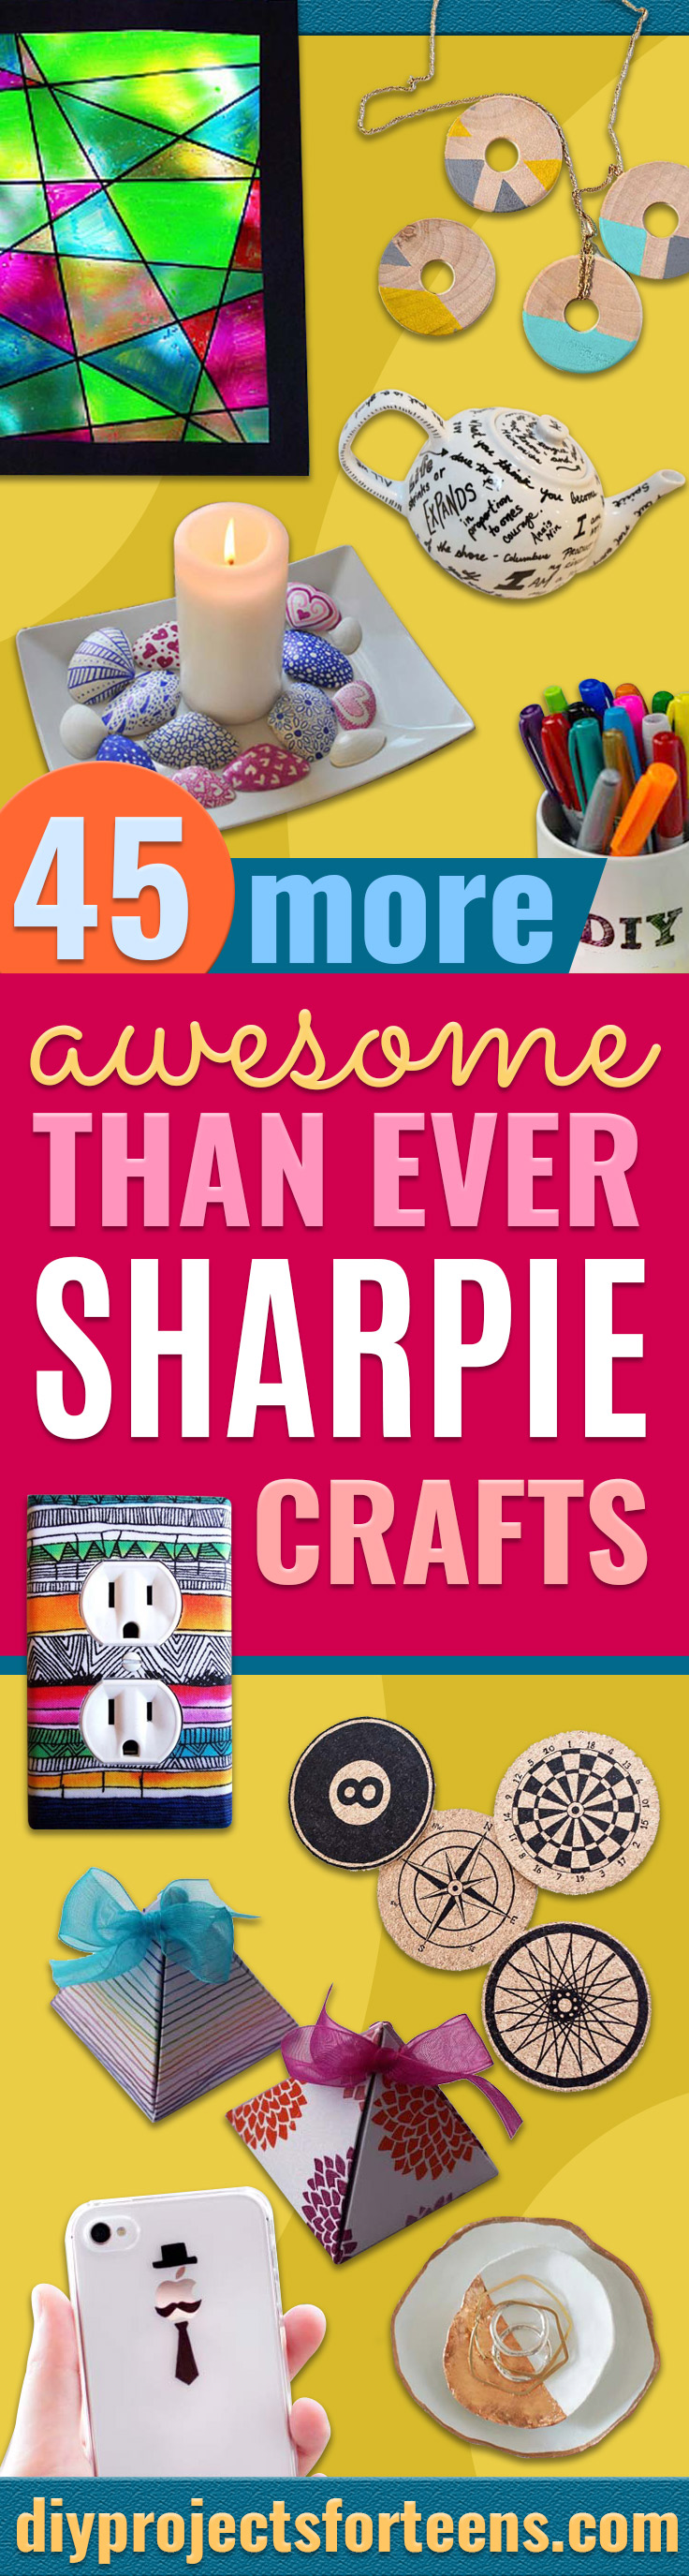 45 DIY Crafts With Sharpie Markers